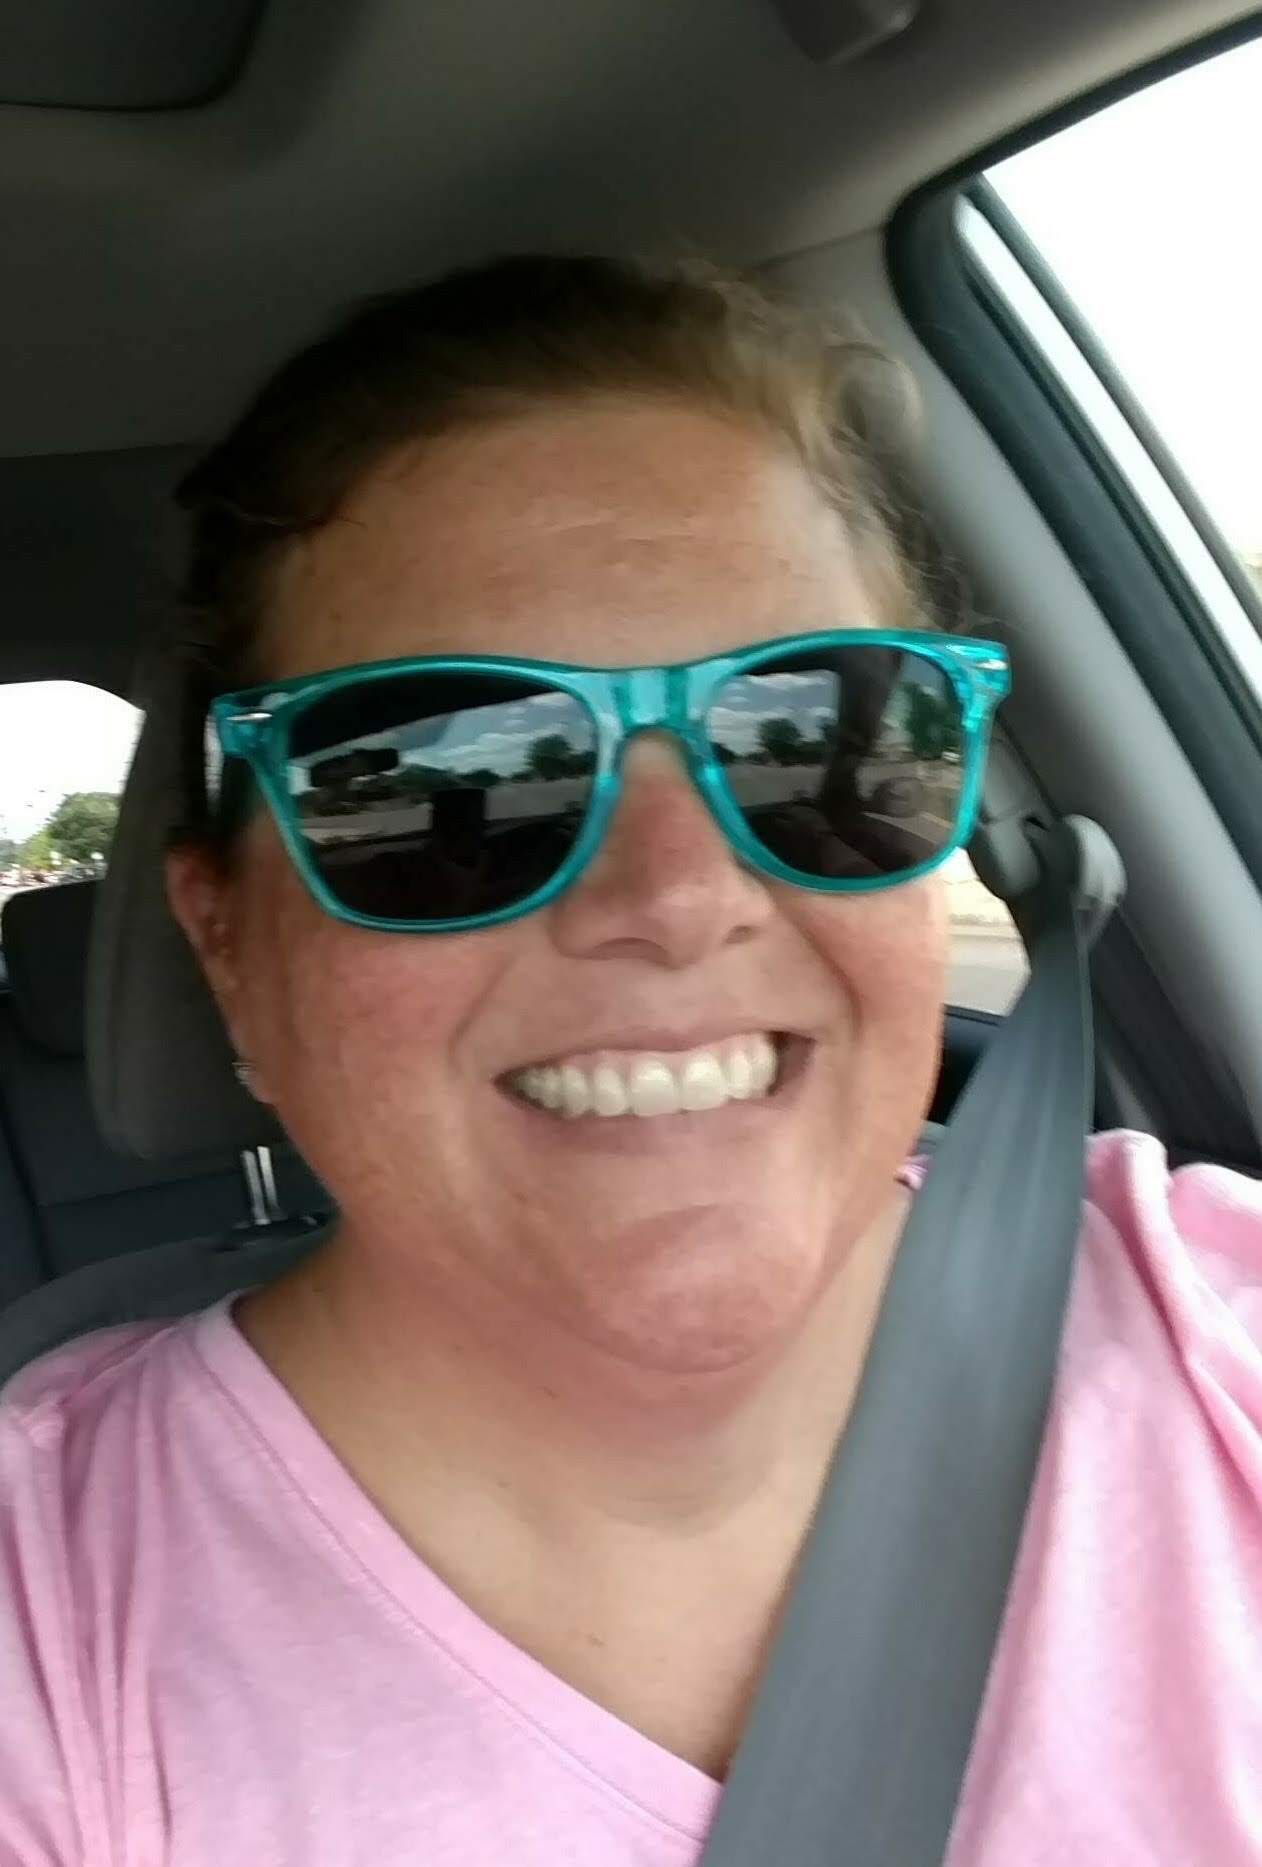 CareDriver of the Month: Lisa S.